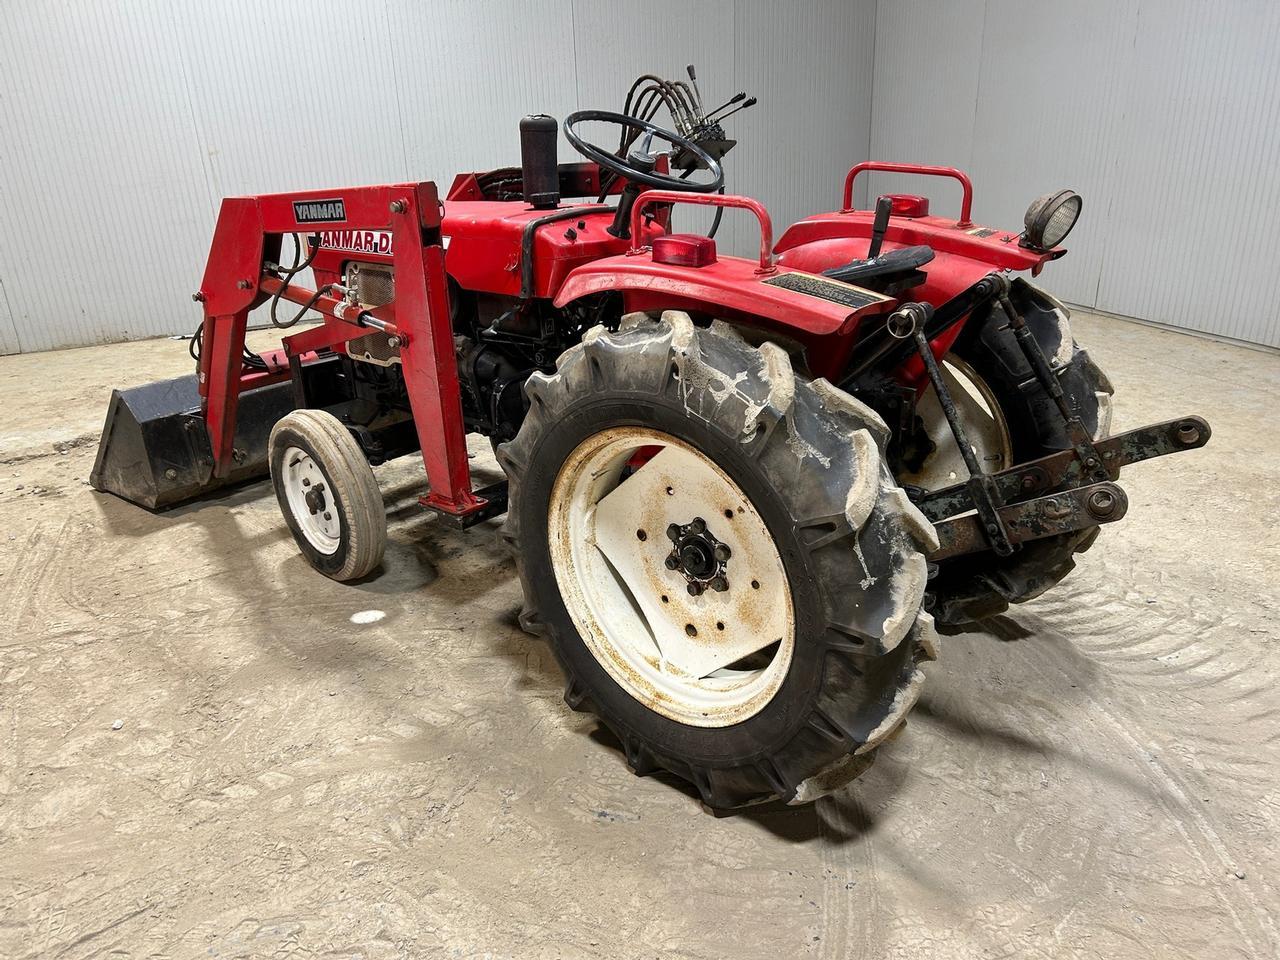 Yanmar YM1500 Tractor with Loader